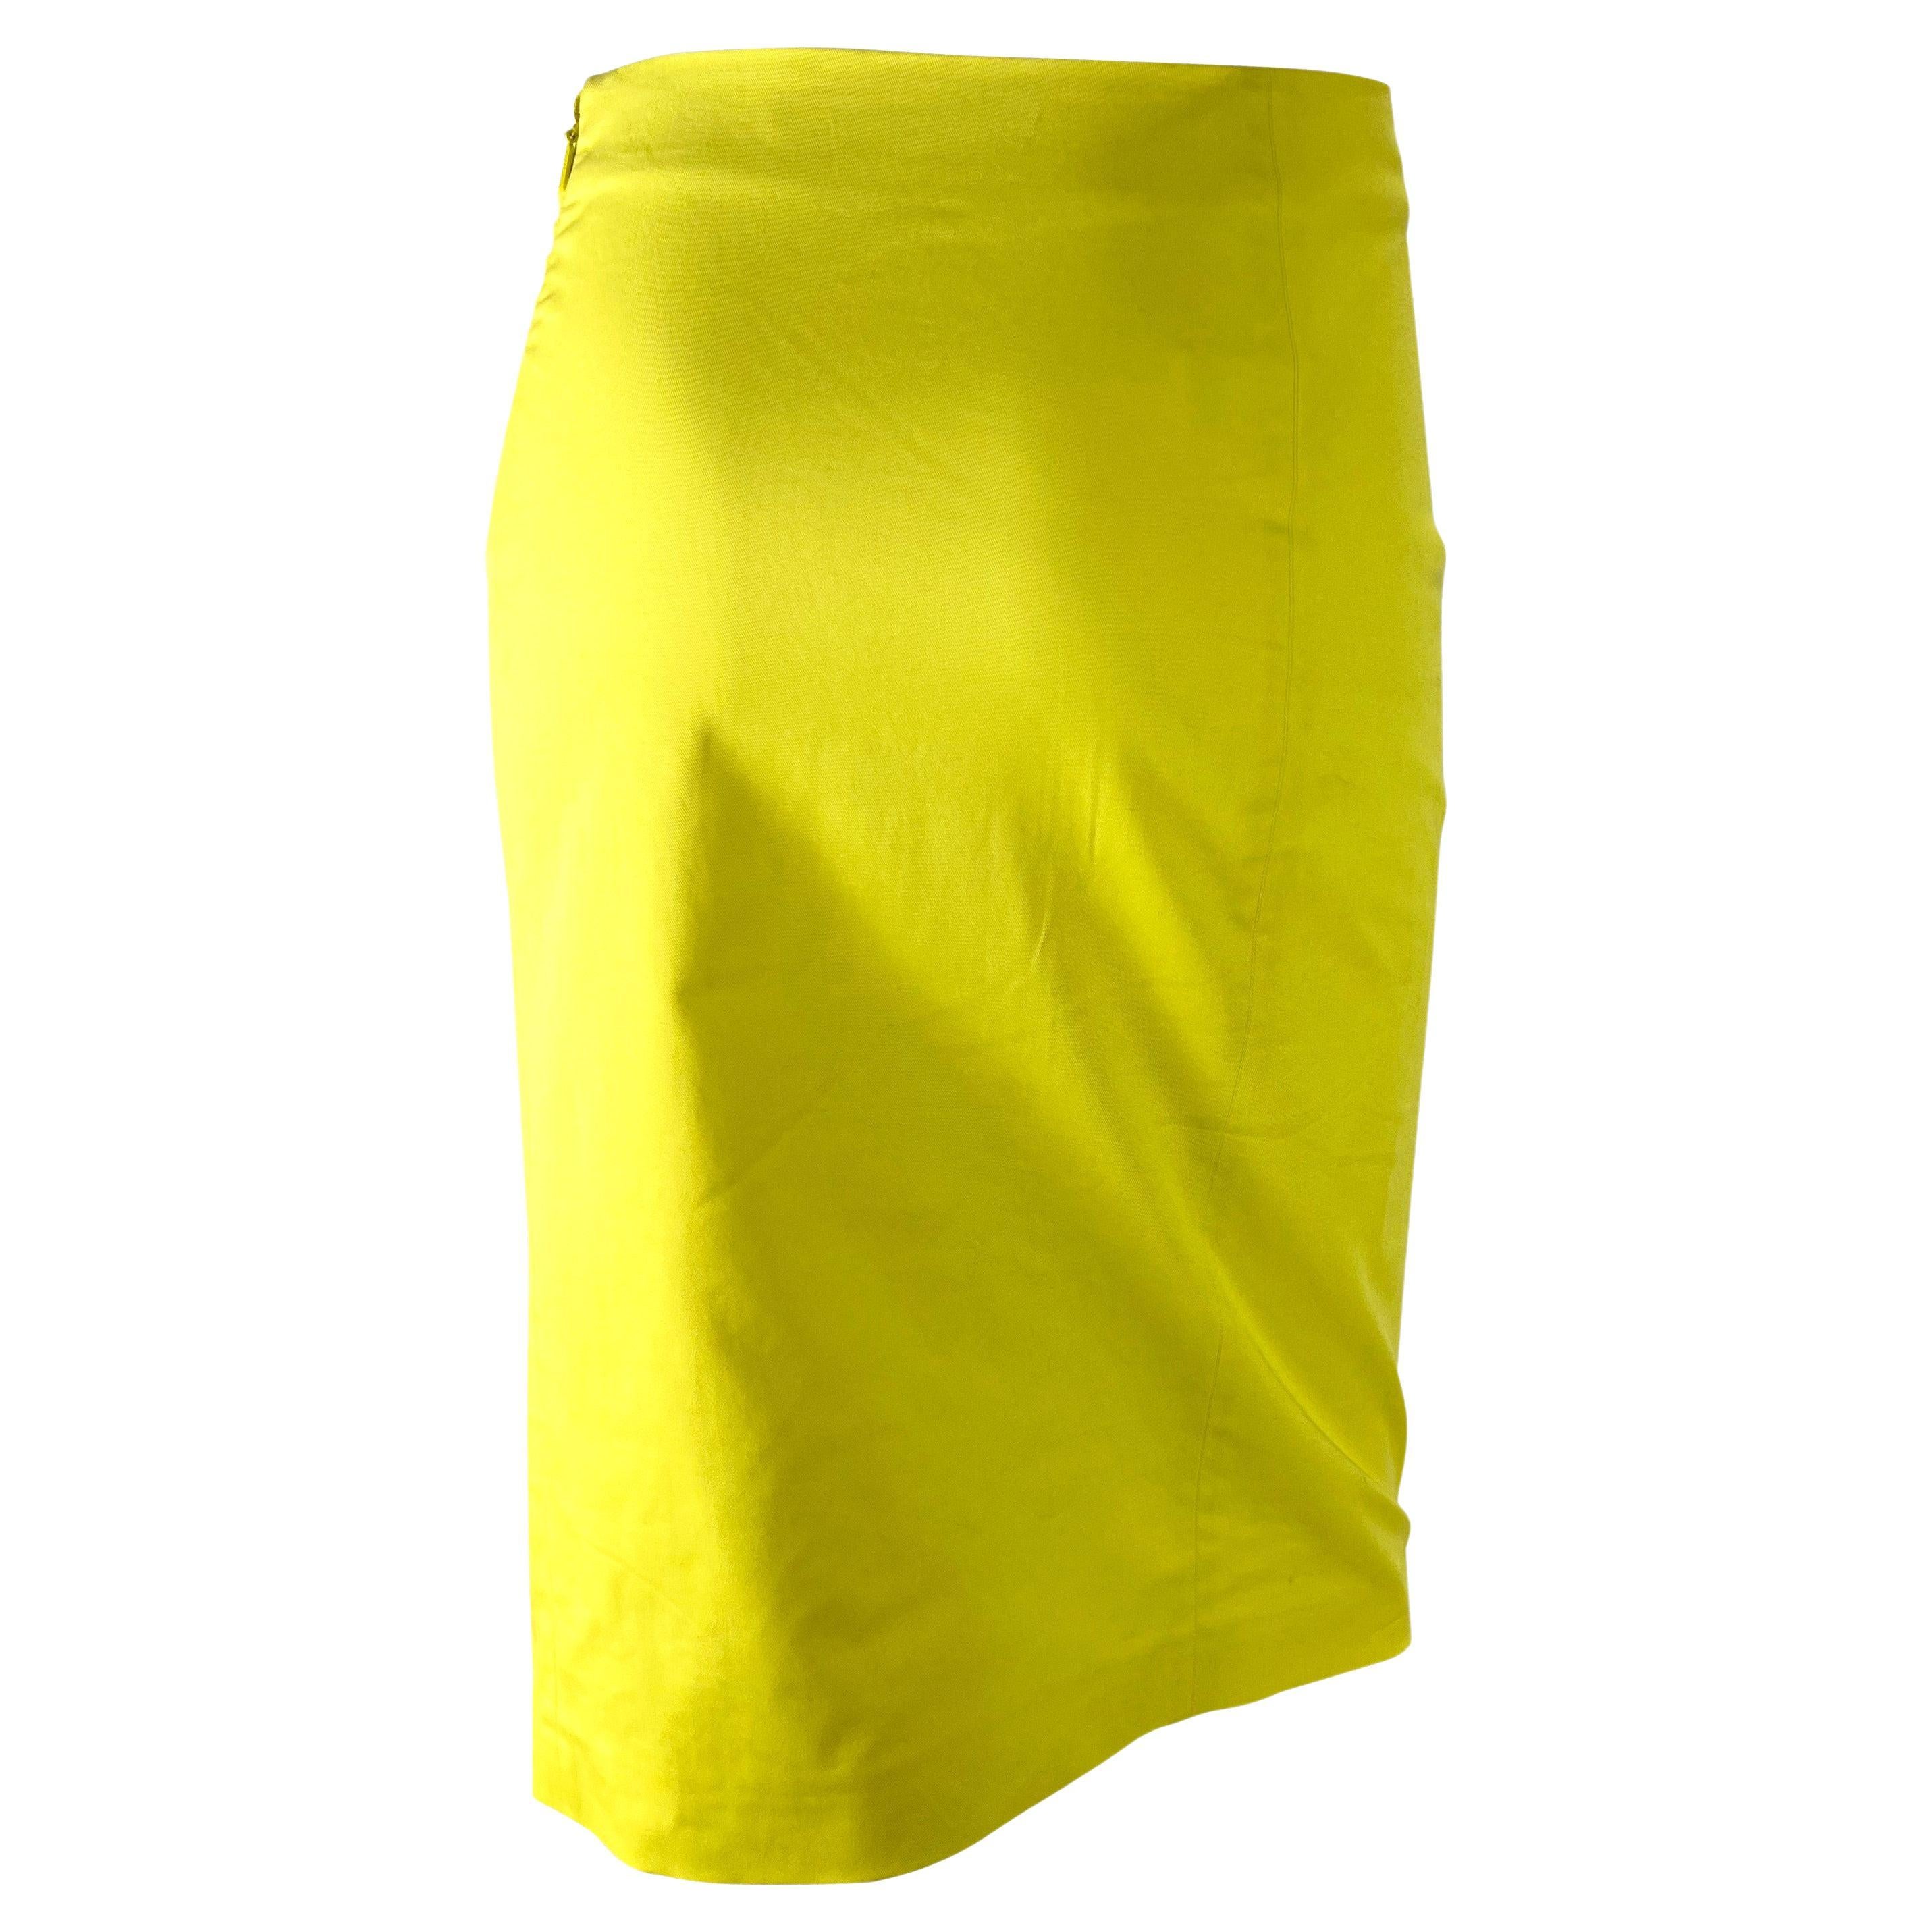 Women's S/S 2000 Gucci by Tom Ford Yellow Cotton Pencil Skirt Leather Bow Appliqué For Sale